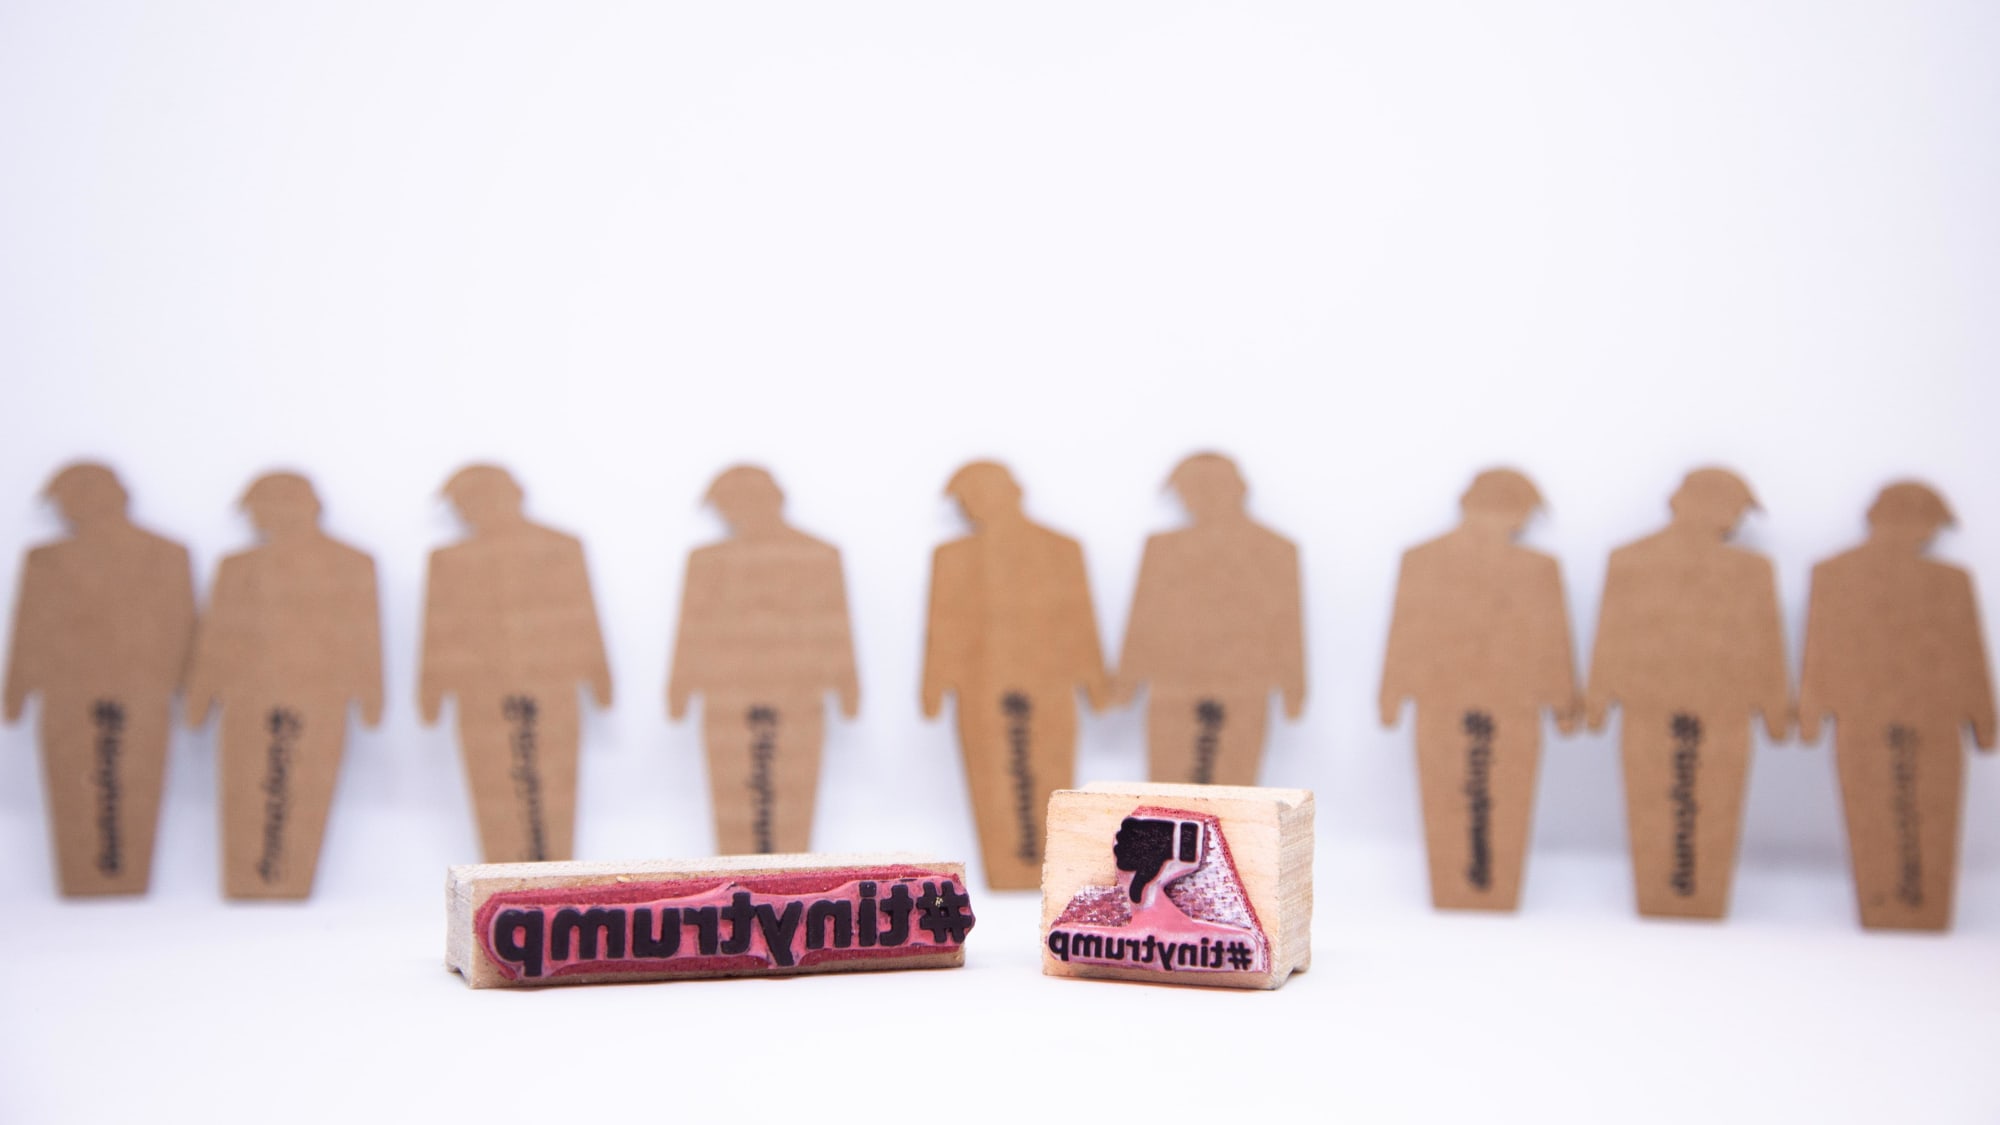 Photograph of 12 blank tiny trumps in the background and a rubber stamp with a thumbs down sign in the foreground